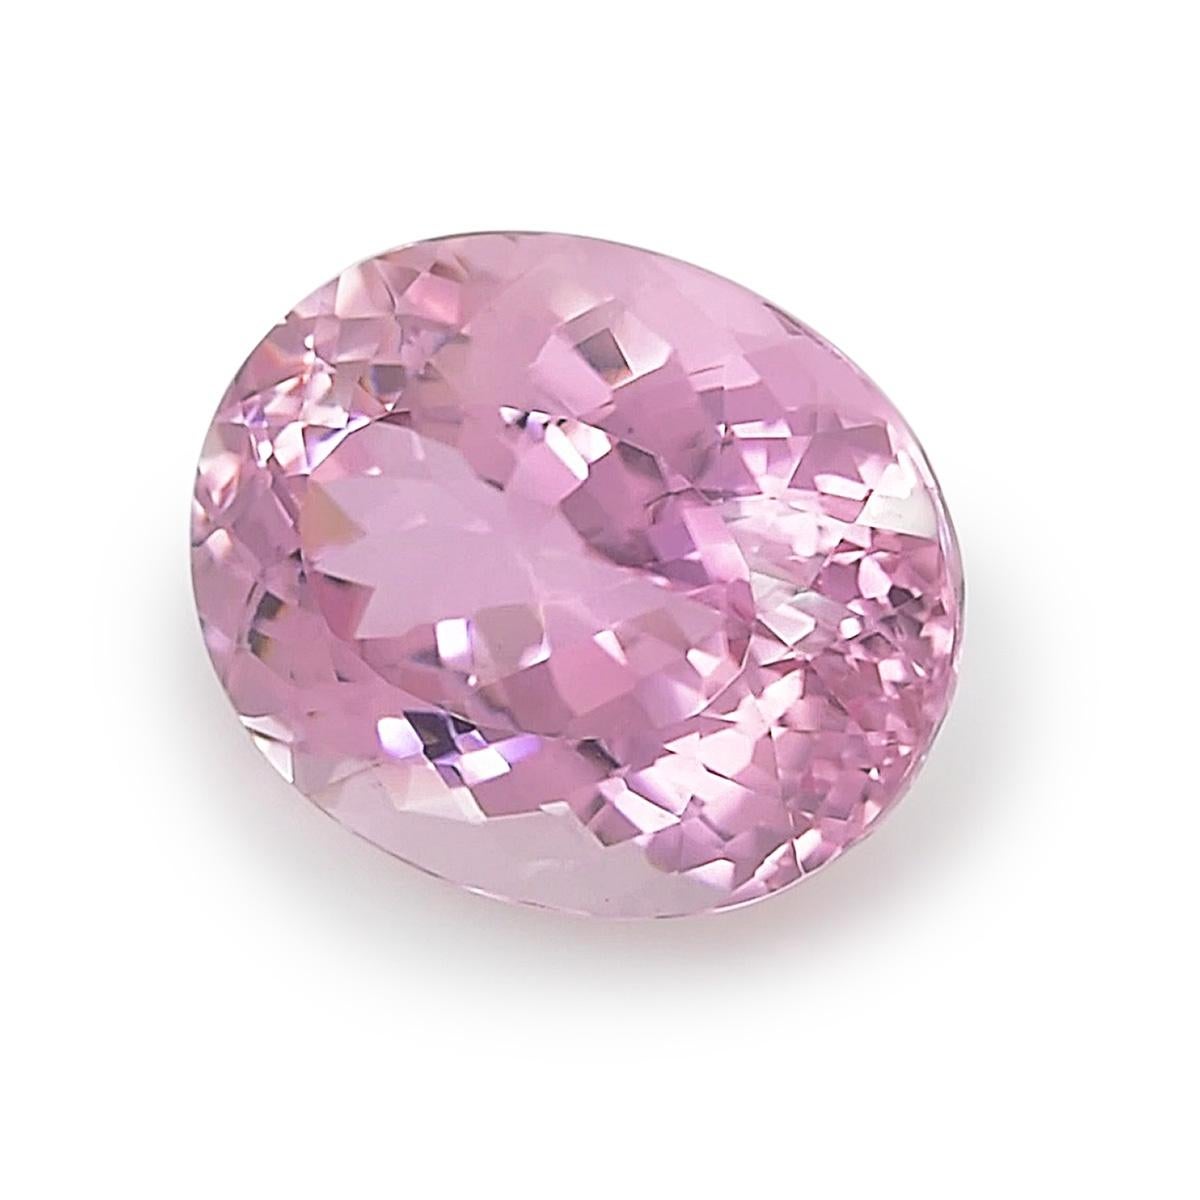 Eye clean with an even bougainvillea, floral pink, here is a 25.14 carat natural Kunzite that will make a stunning choice for a statement ring. Excellent cut paired with its oval shape is what will make this gemstone a powerful yet contemporary